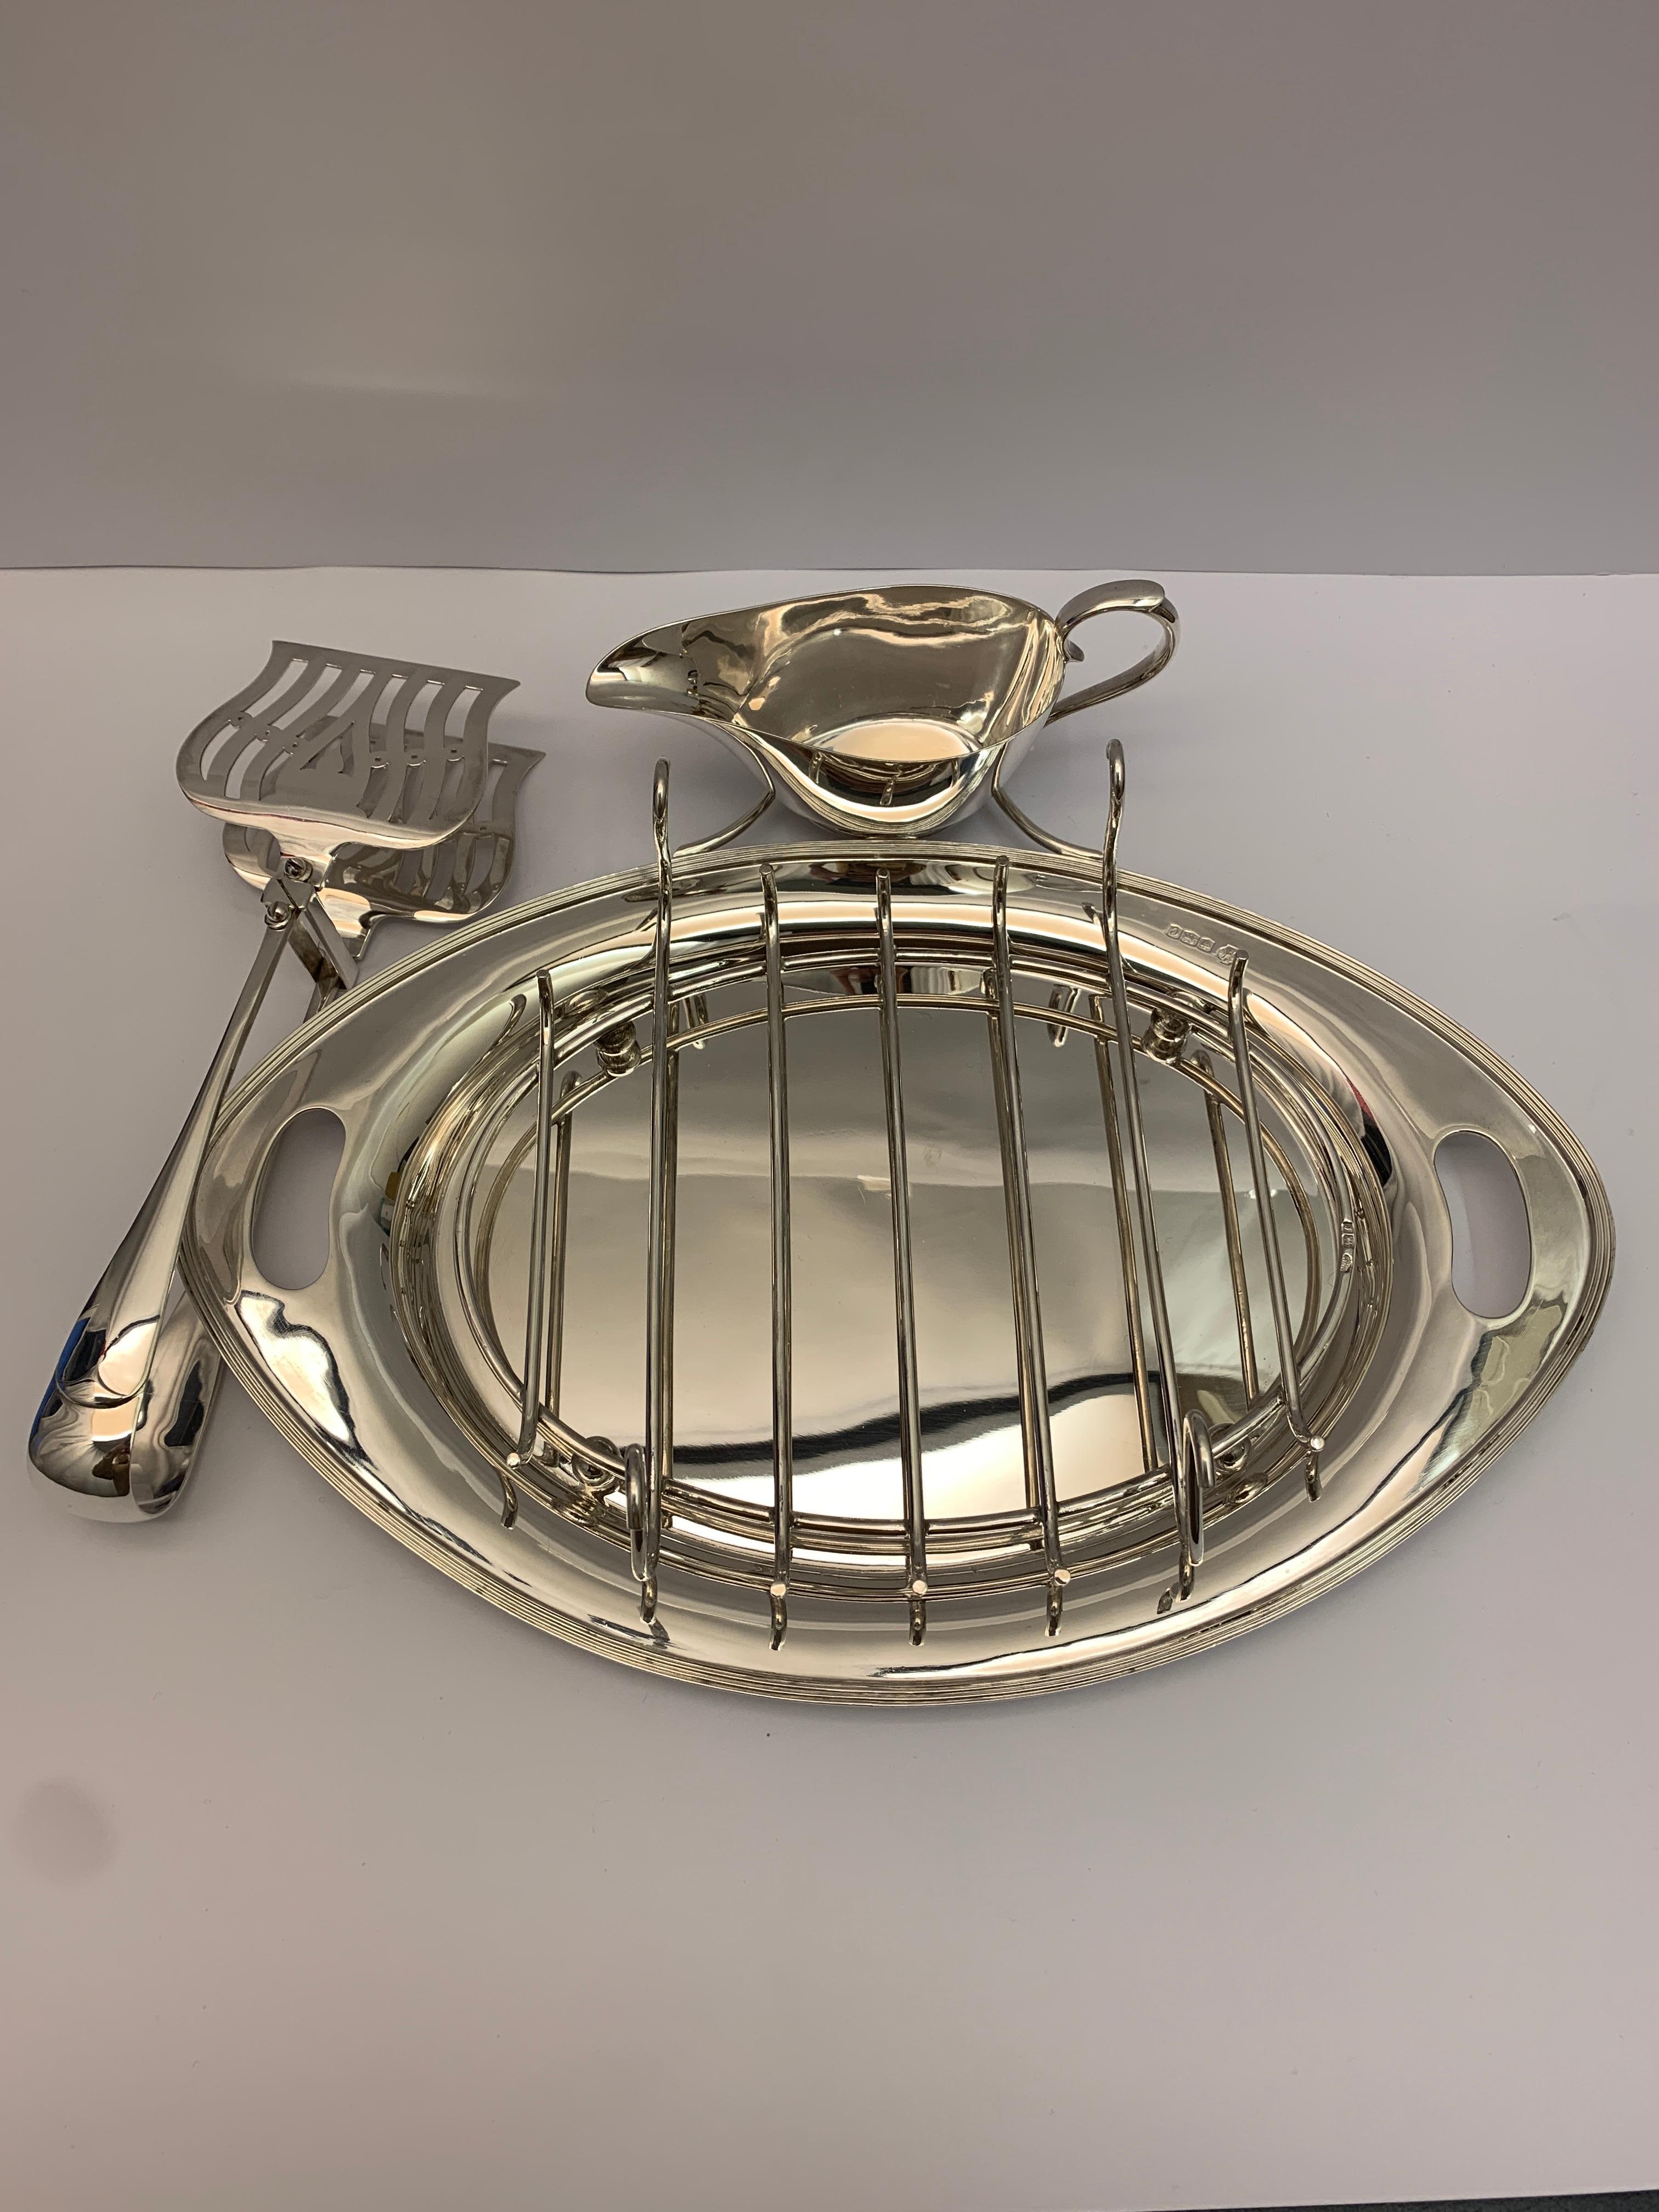 A rare antique silver asparagus serving dish with silver serving tongs, rack and a silver sauce boat.

 